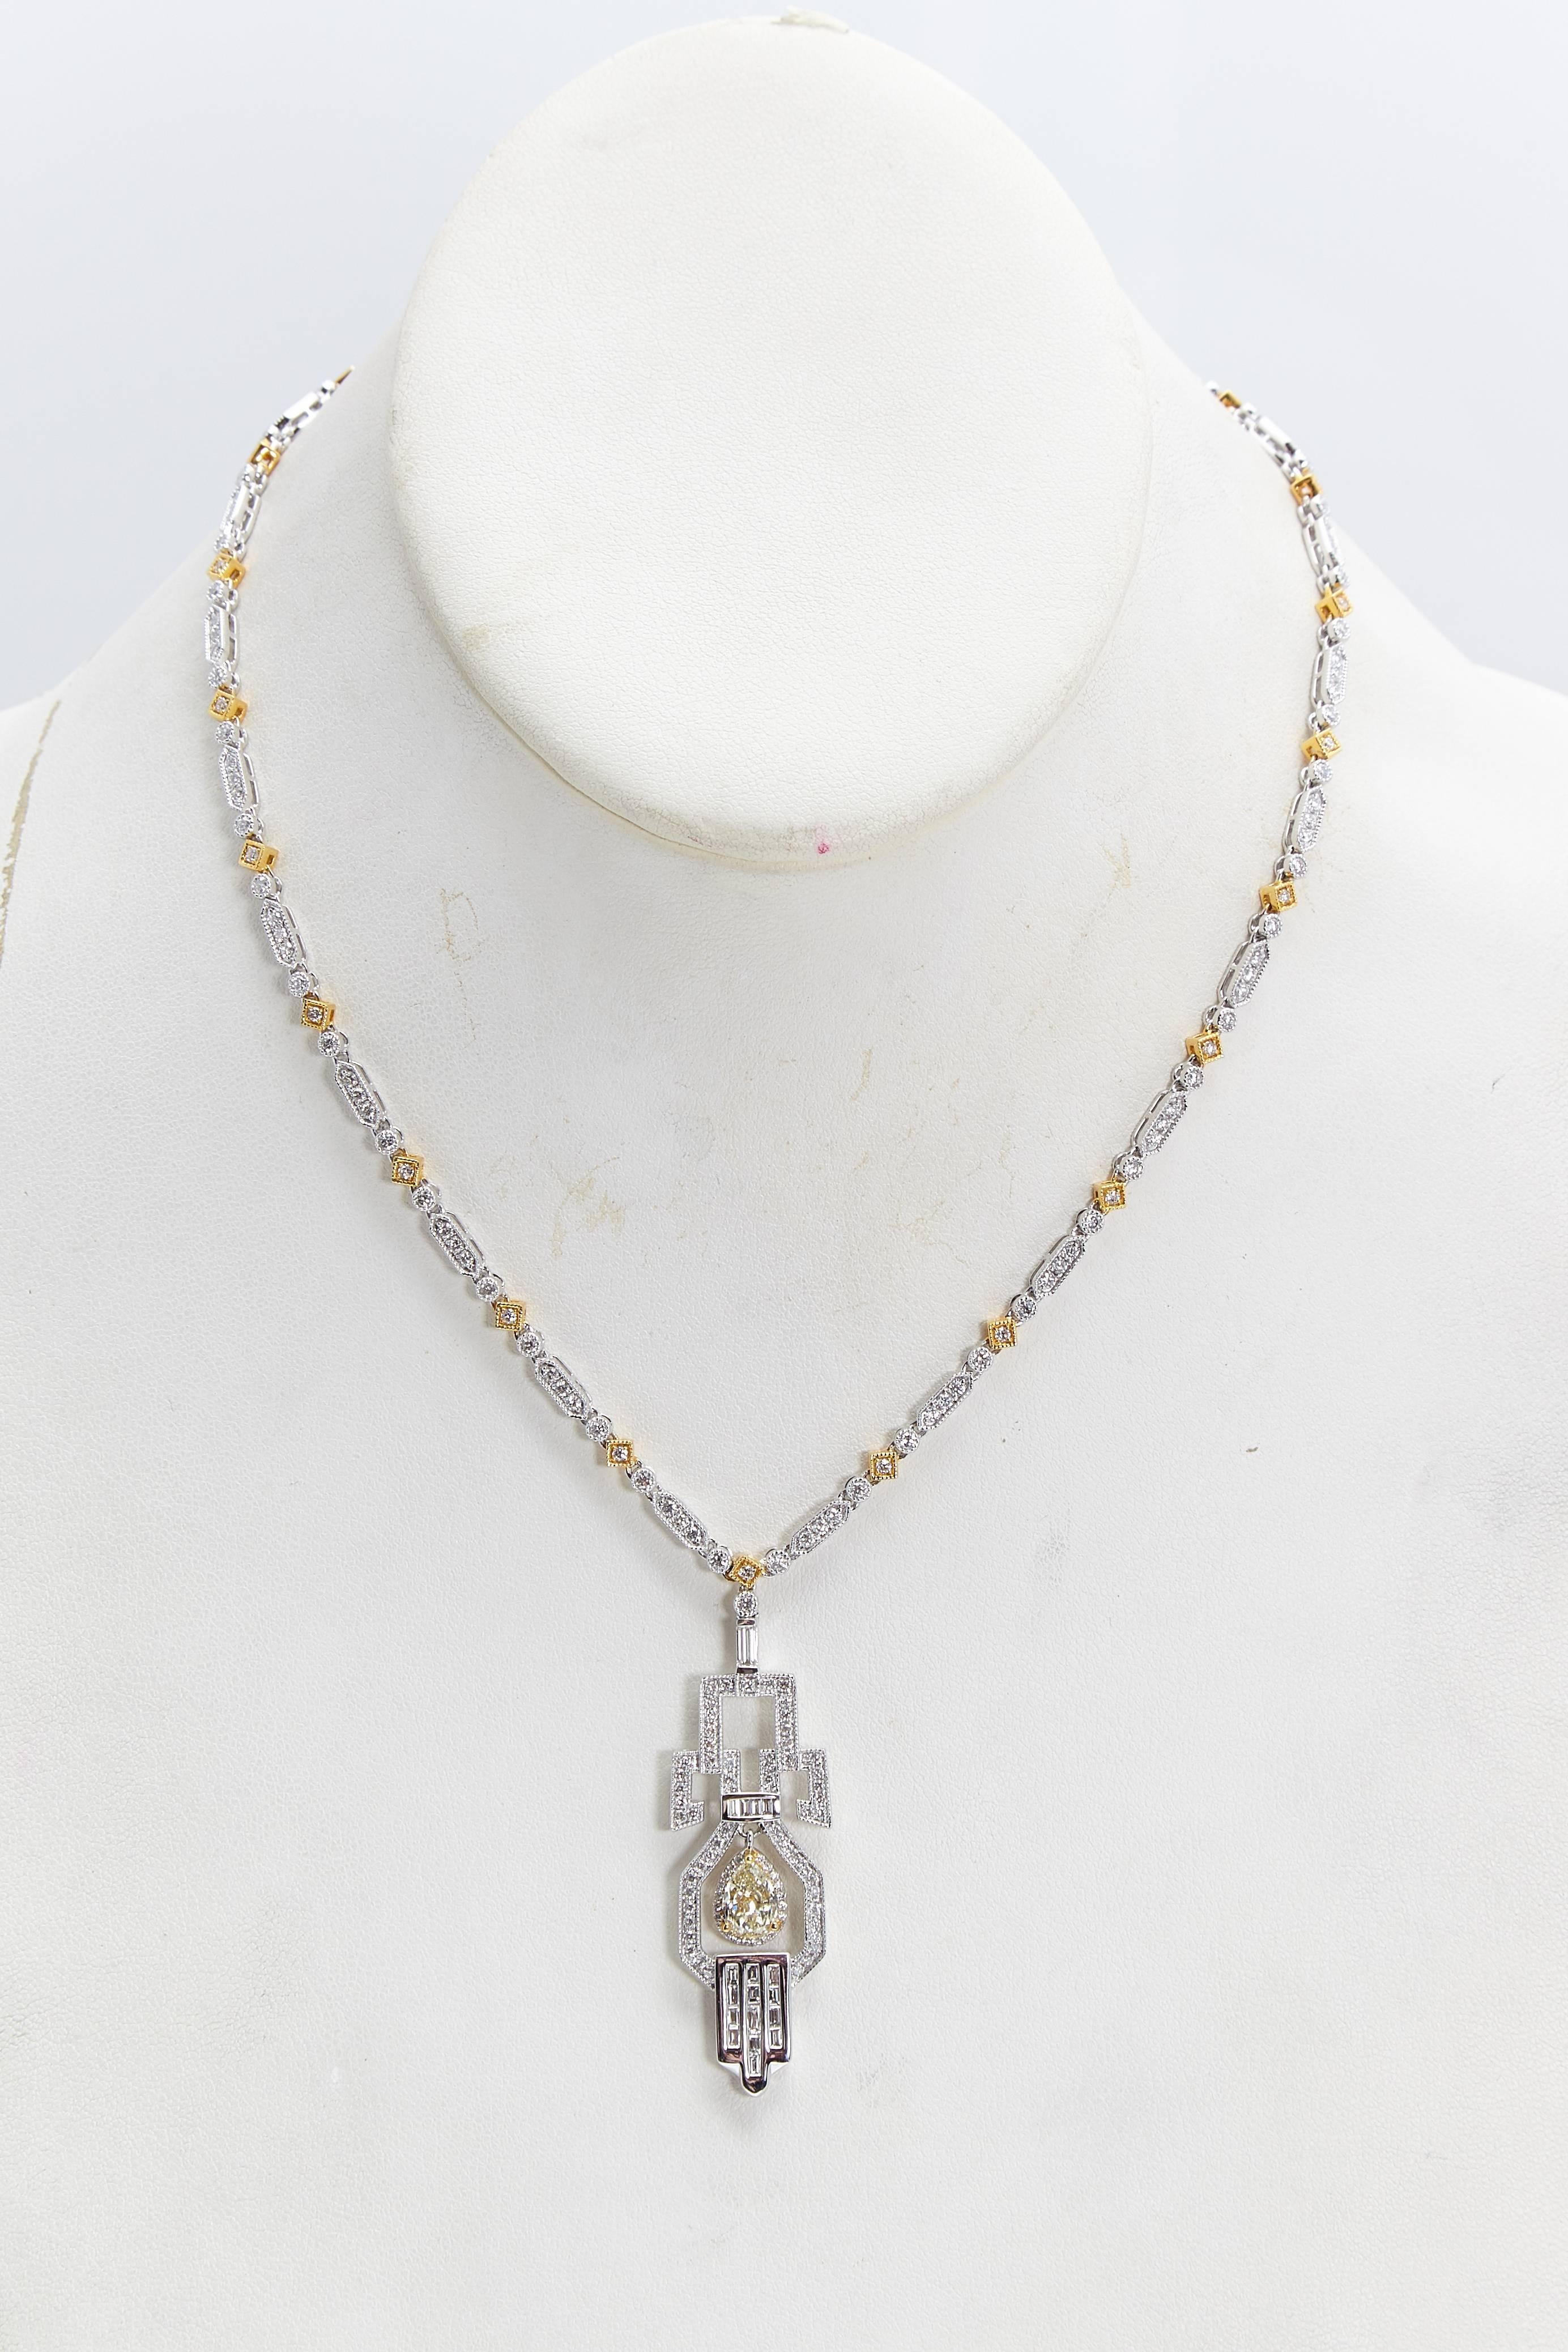 Beautifully designed diamond and eighteen karat white and yellow gold art deco styled pendant necklace.  The pendant has a yellow pear shaped diamond in the center weighing 1.02 carats and 3.30 carats of white diamonds in the necklace and the